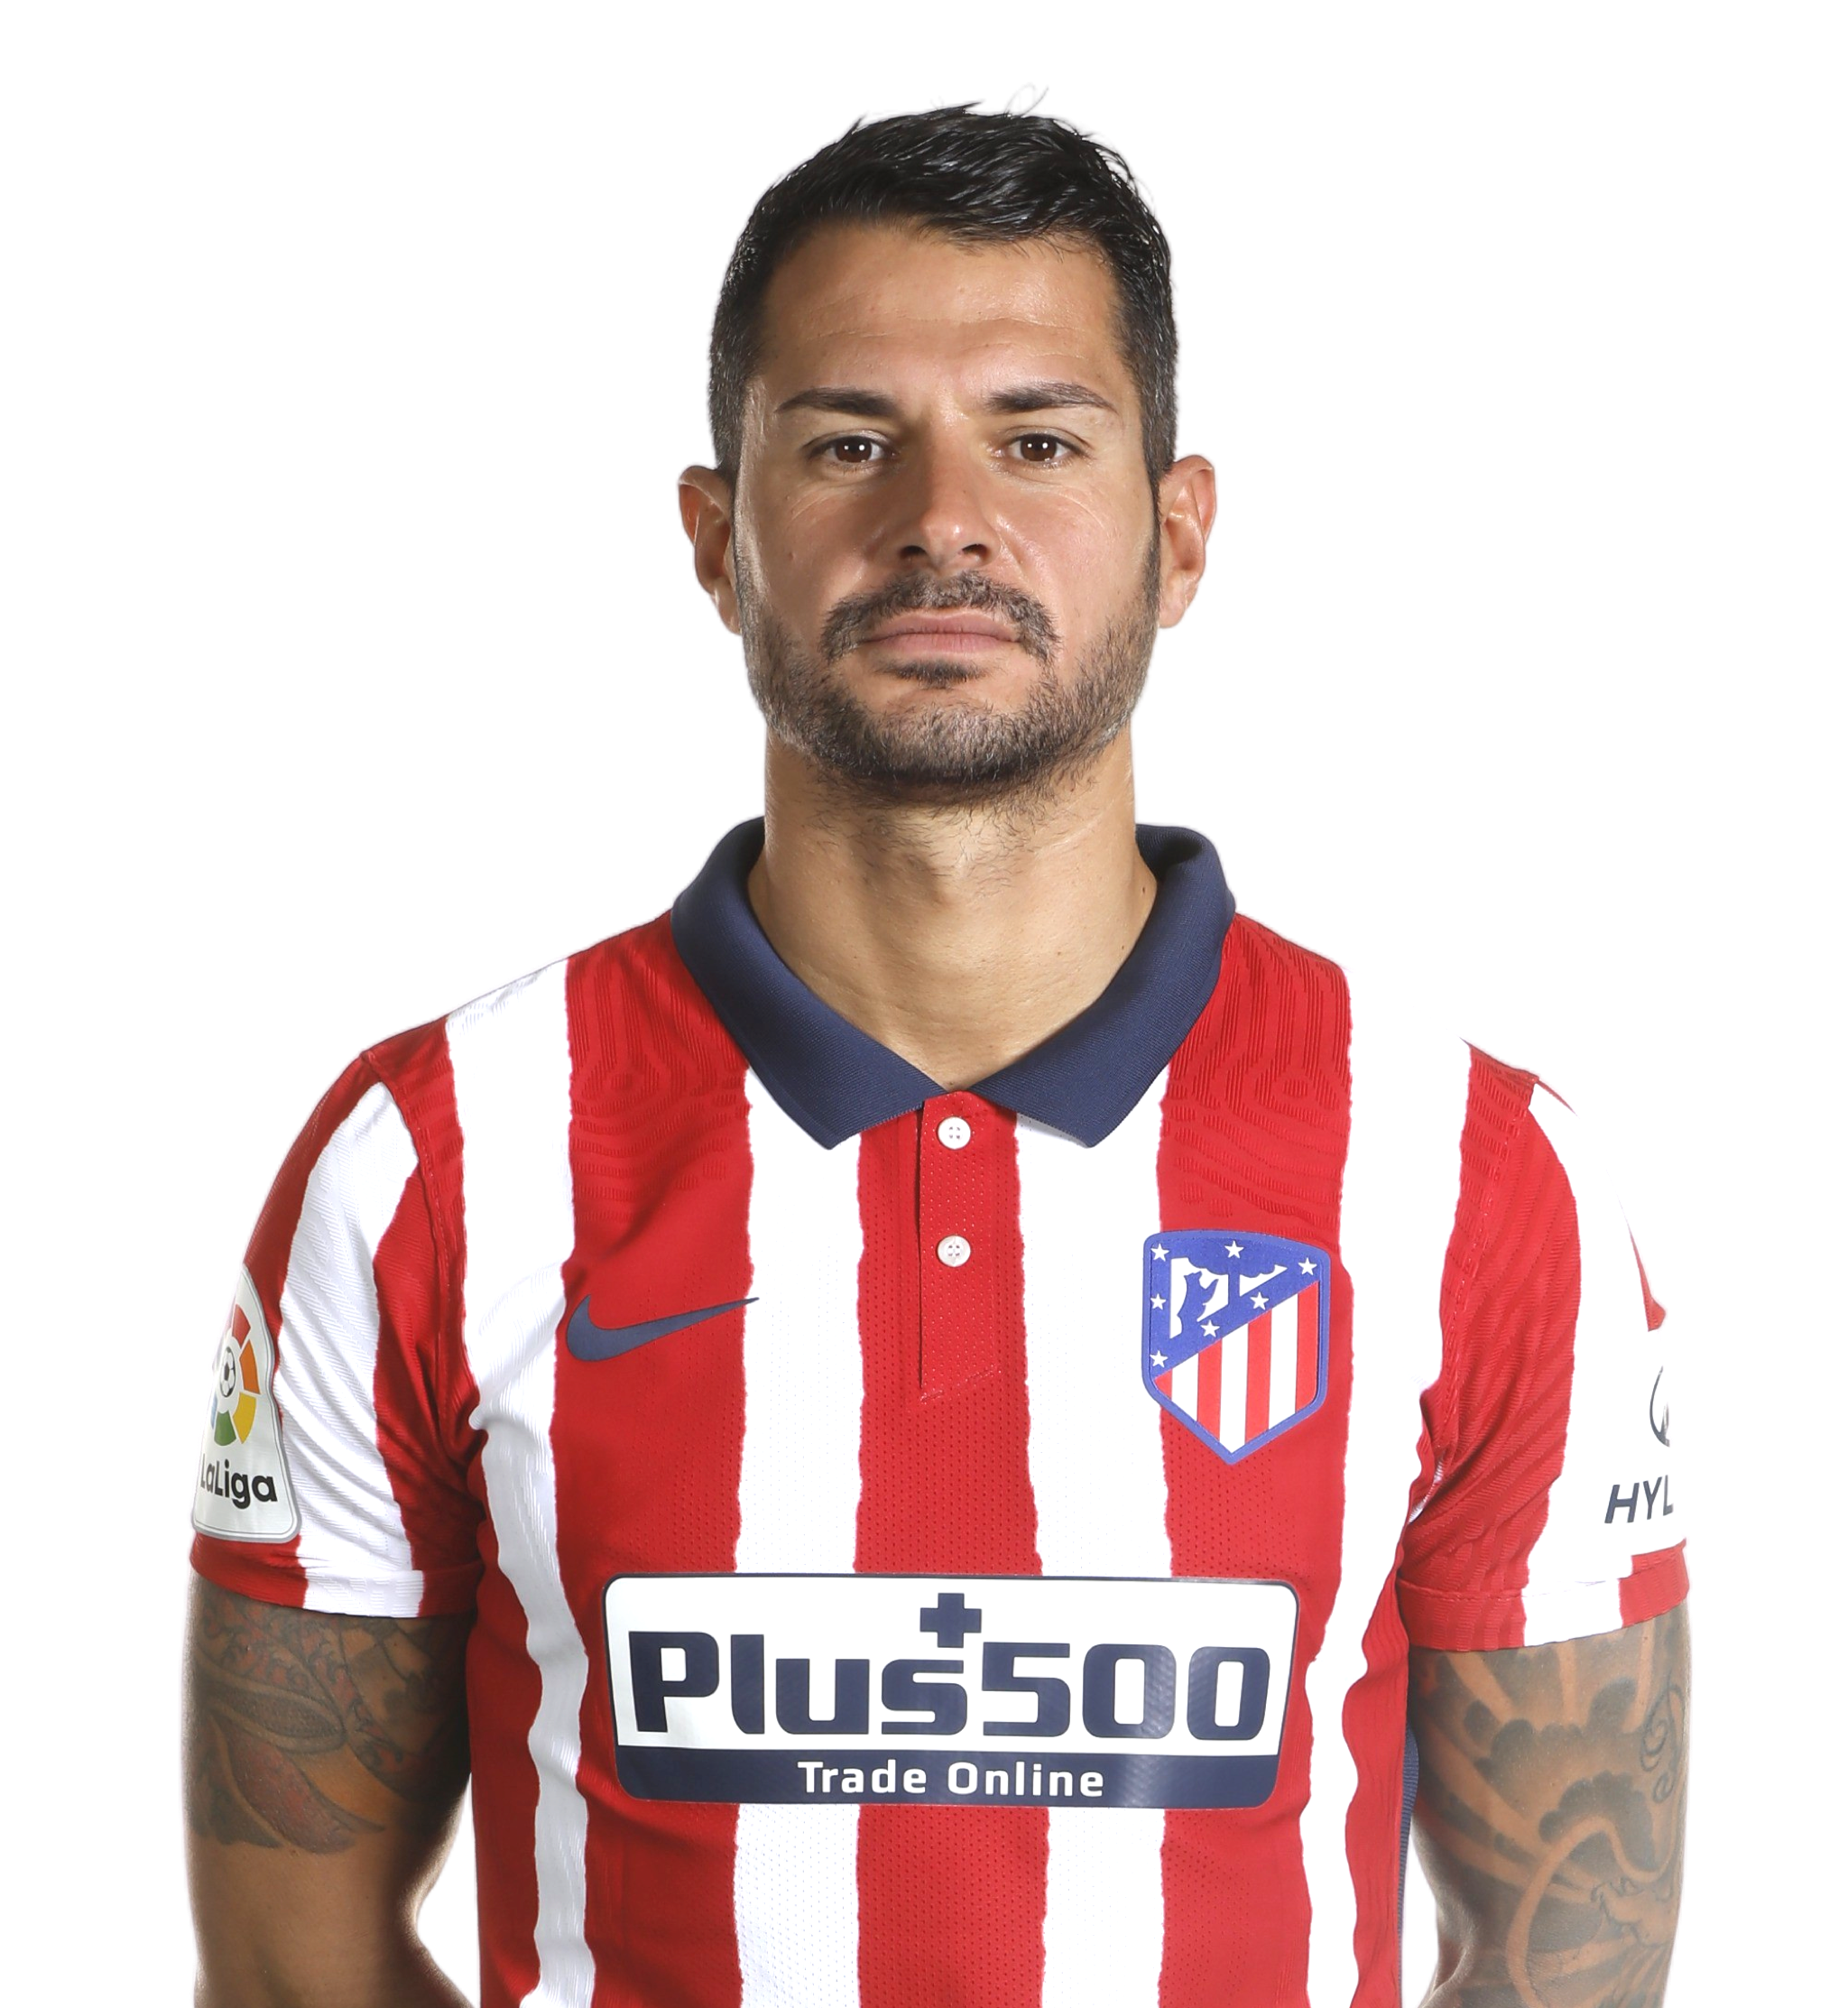 vitolo jersey number